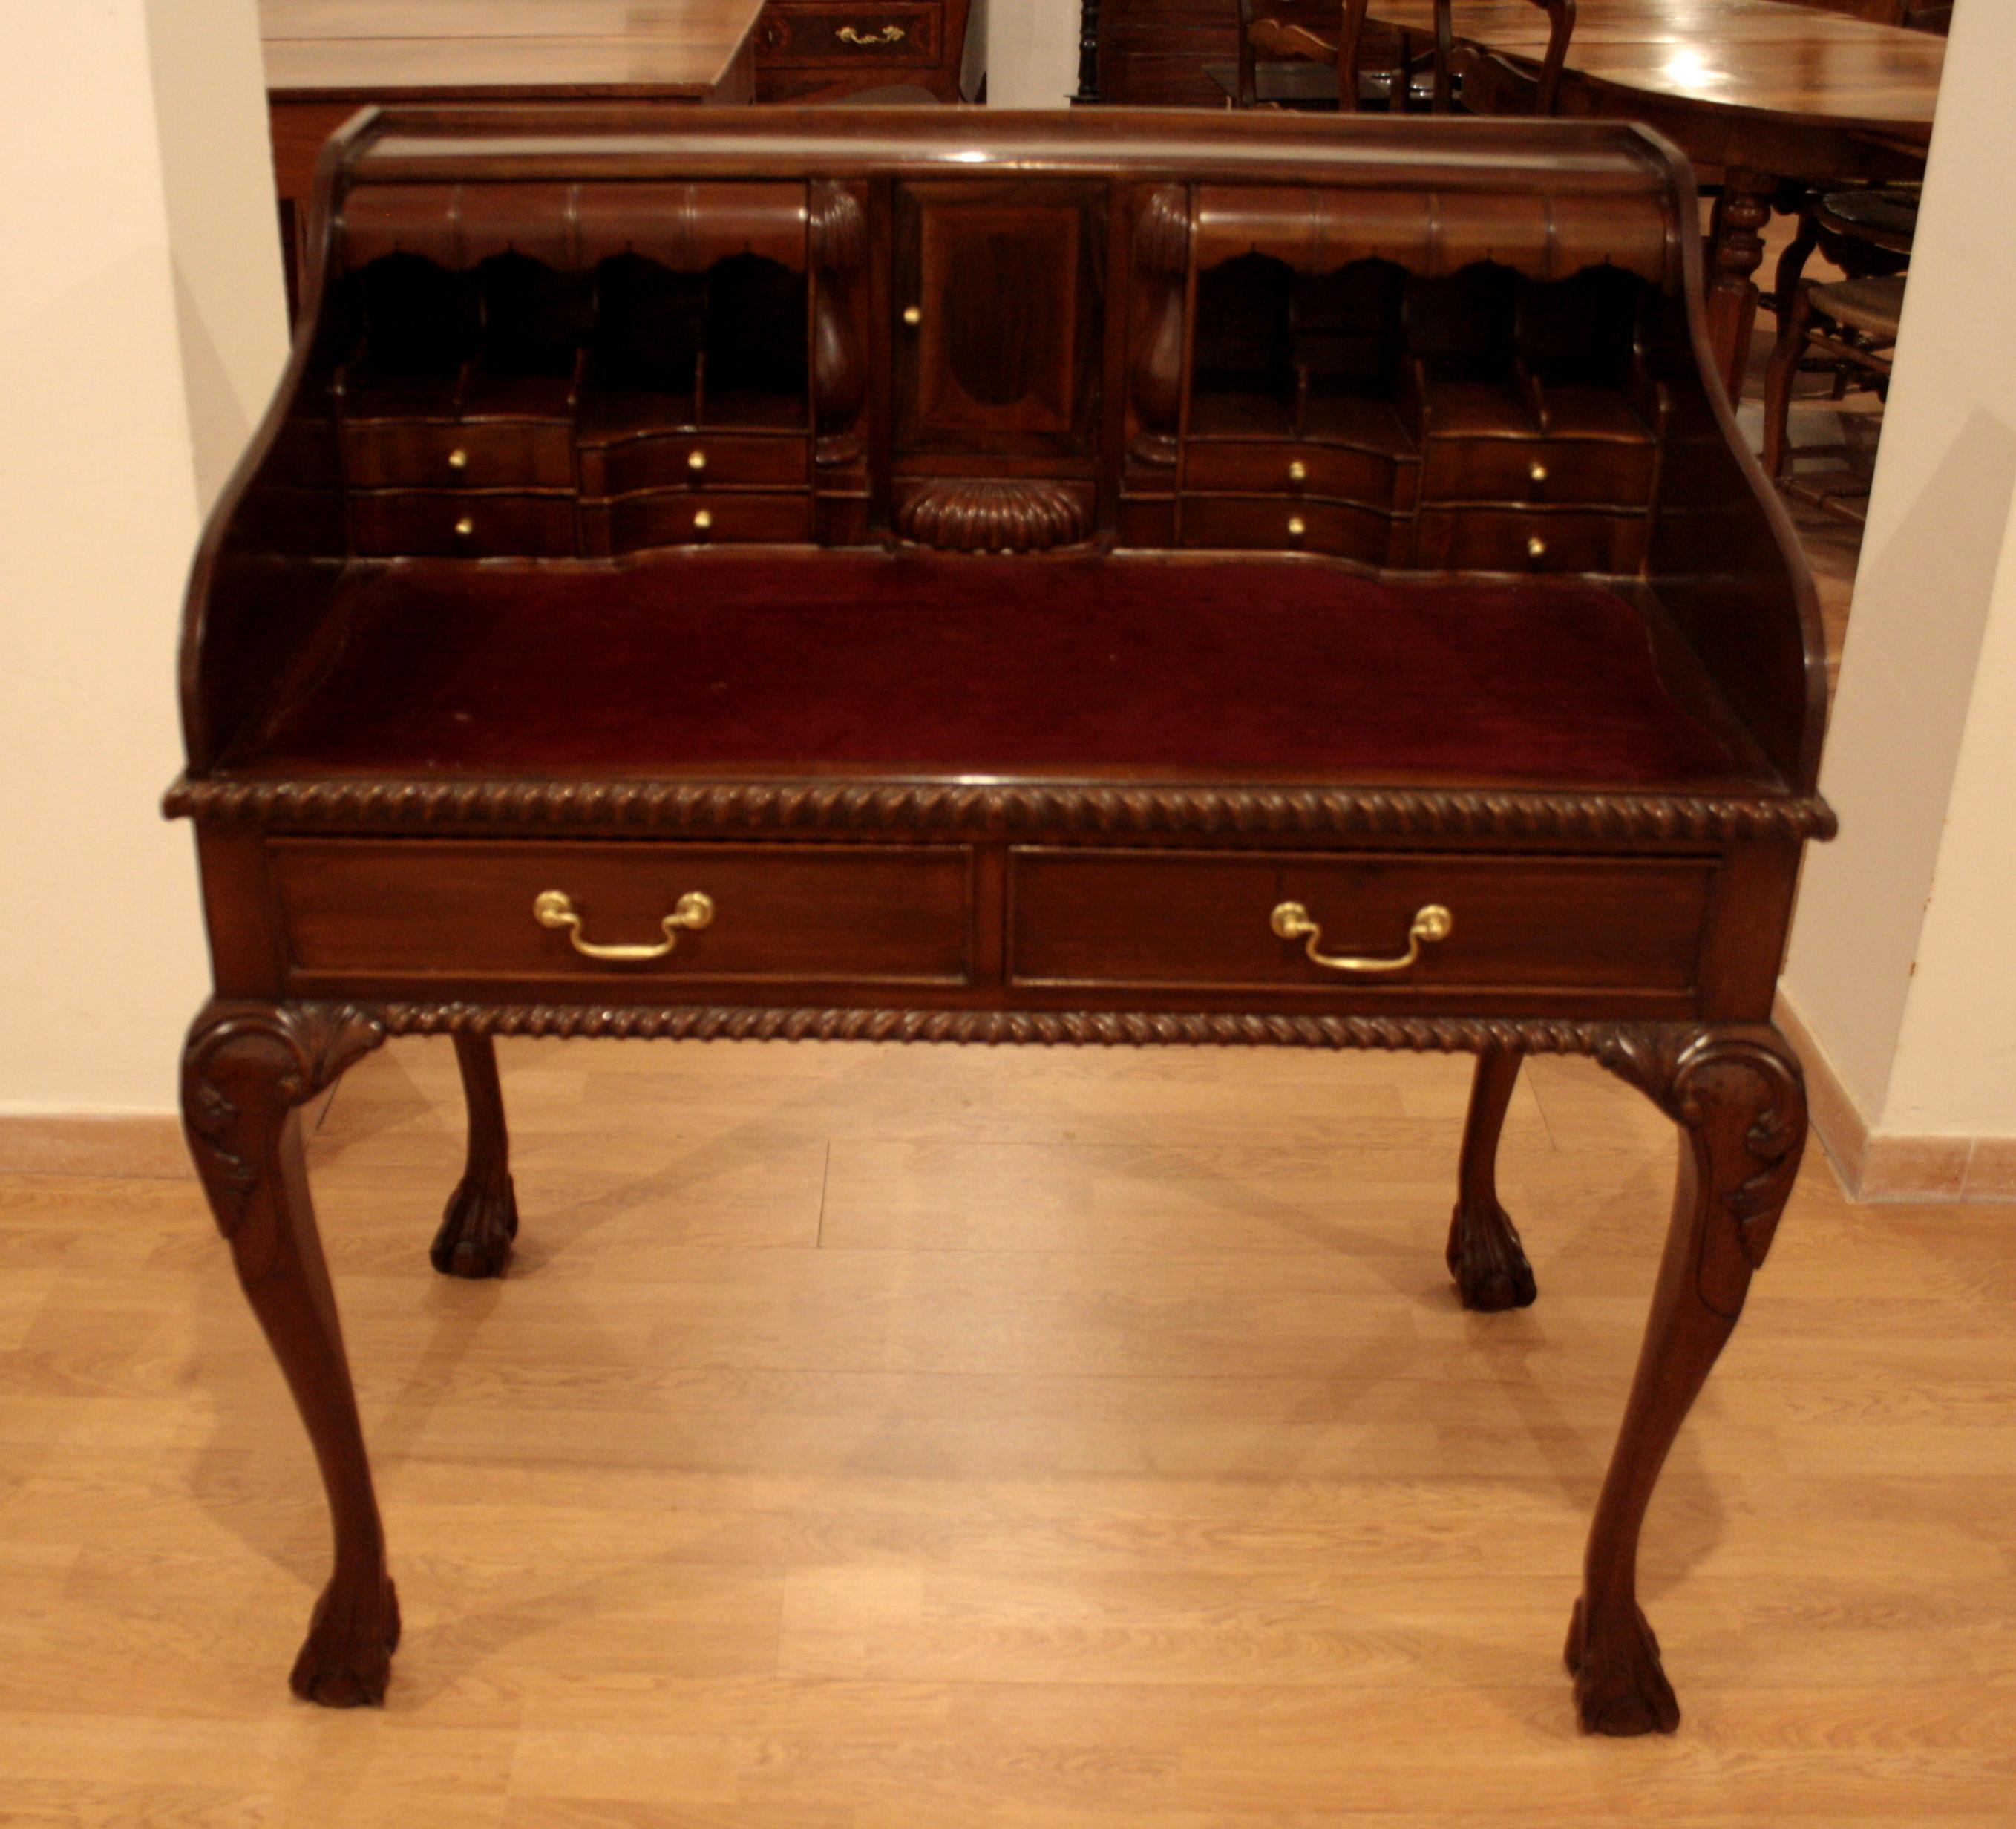 Chippendale writing desk

Writing desk, with arched legs and delicate carvings. It has 2 large drawers, 8 drawers and 7 small 'secret' drawers. The writing surface in red velvet enhances the style and comfort of this aristocratic and compact desk,